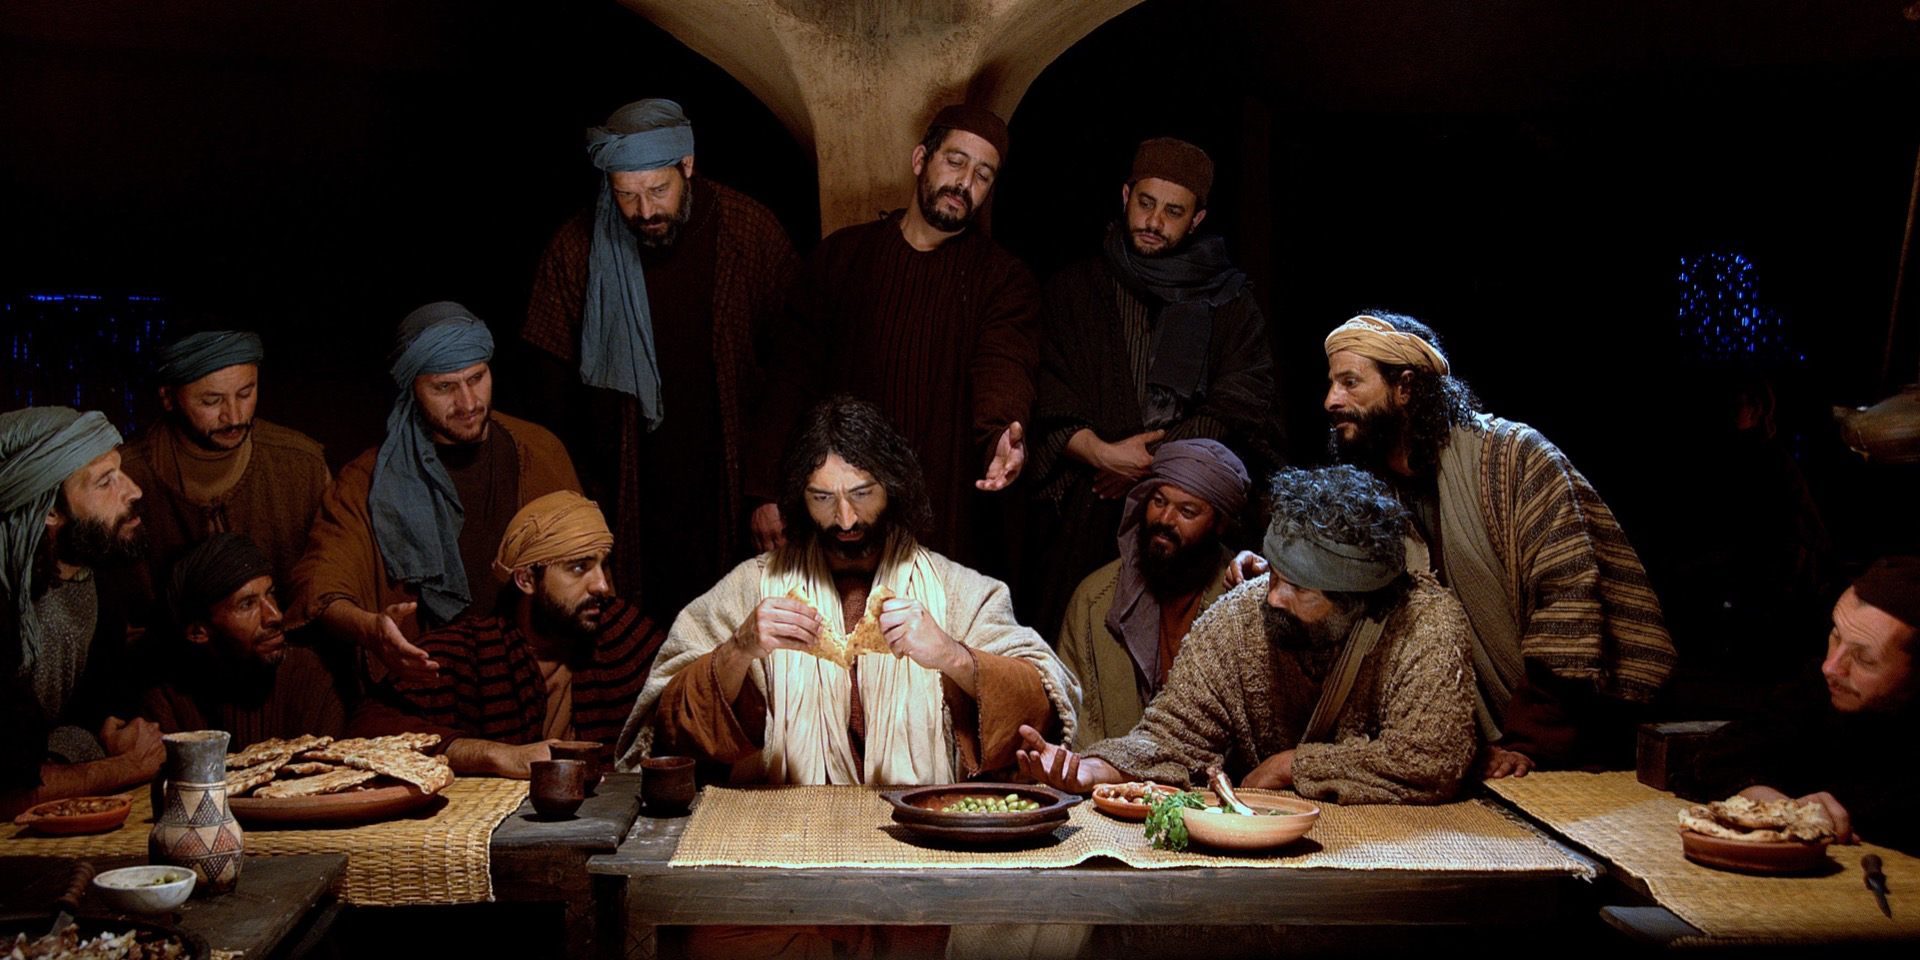 The Lord's supper: Remembering Christ’s death